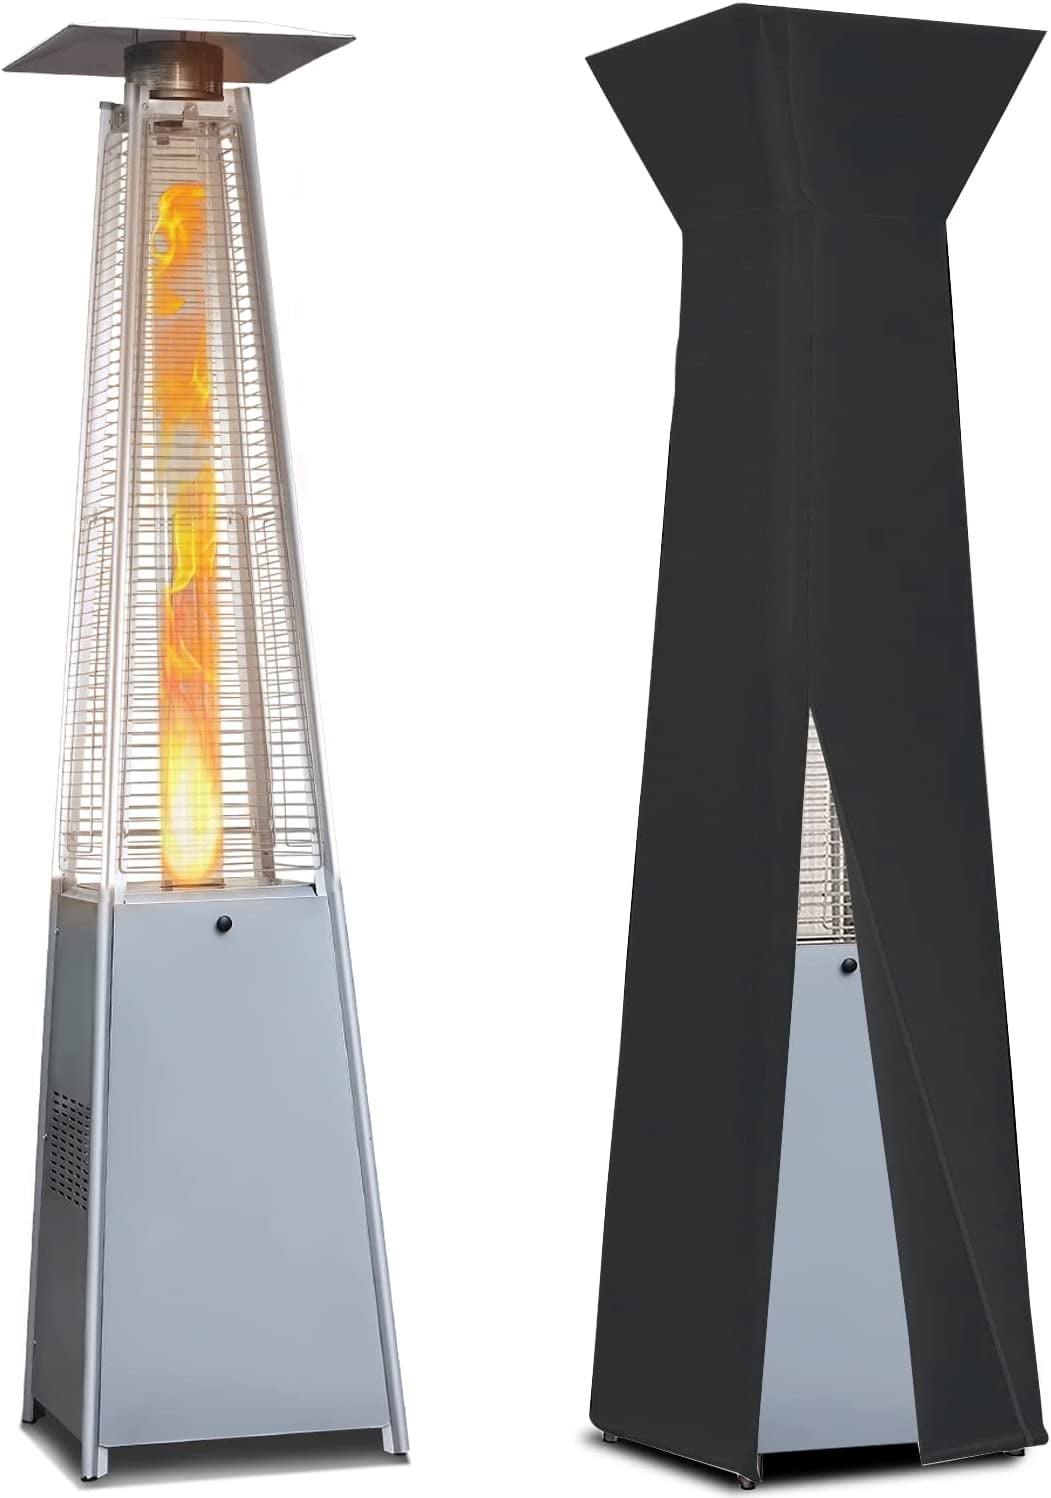 Hammered Bronze Thermo Tiki Outdoor Propane Patio Heater with Cover Commercial LP Gas Porch & Deck Heater 